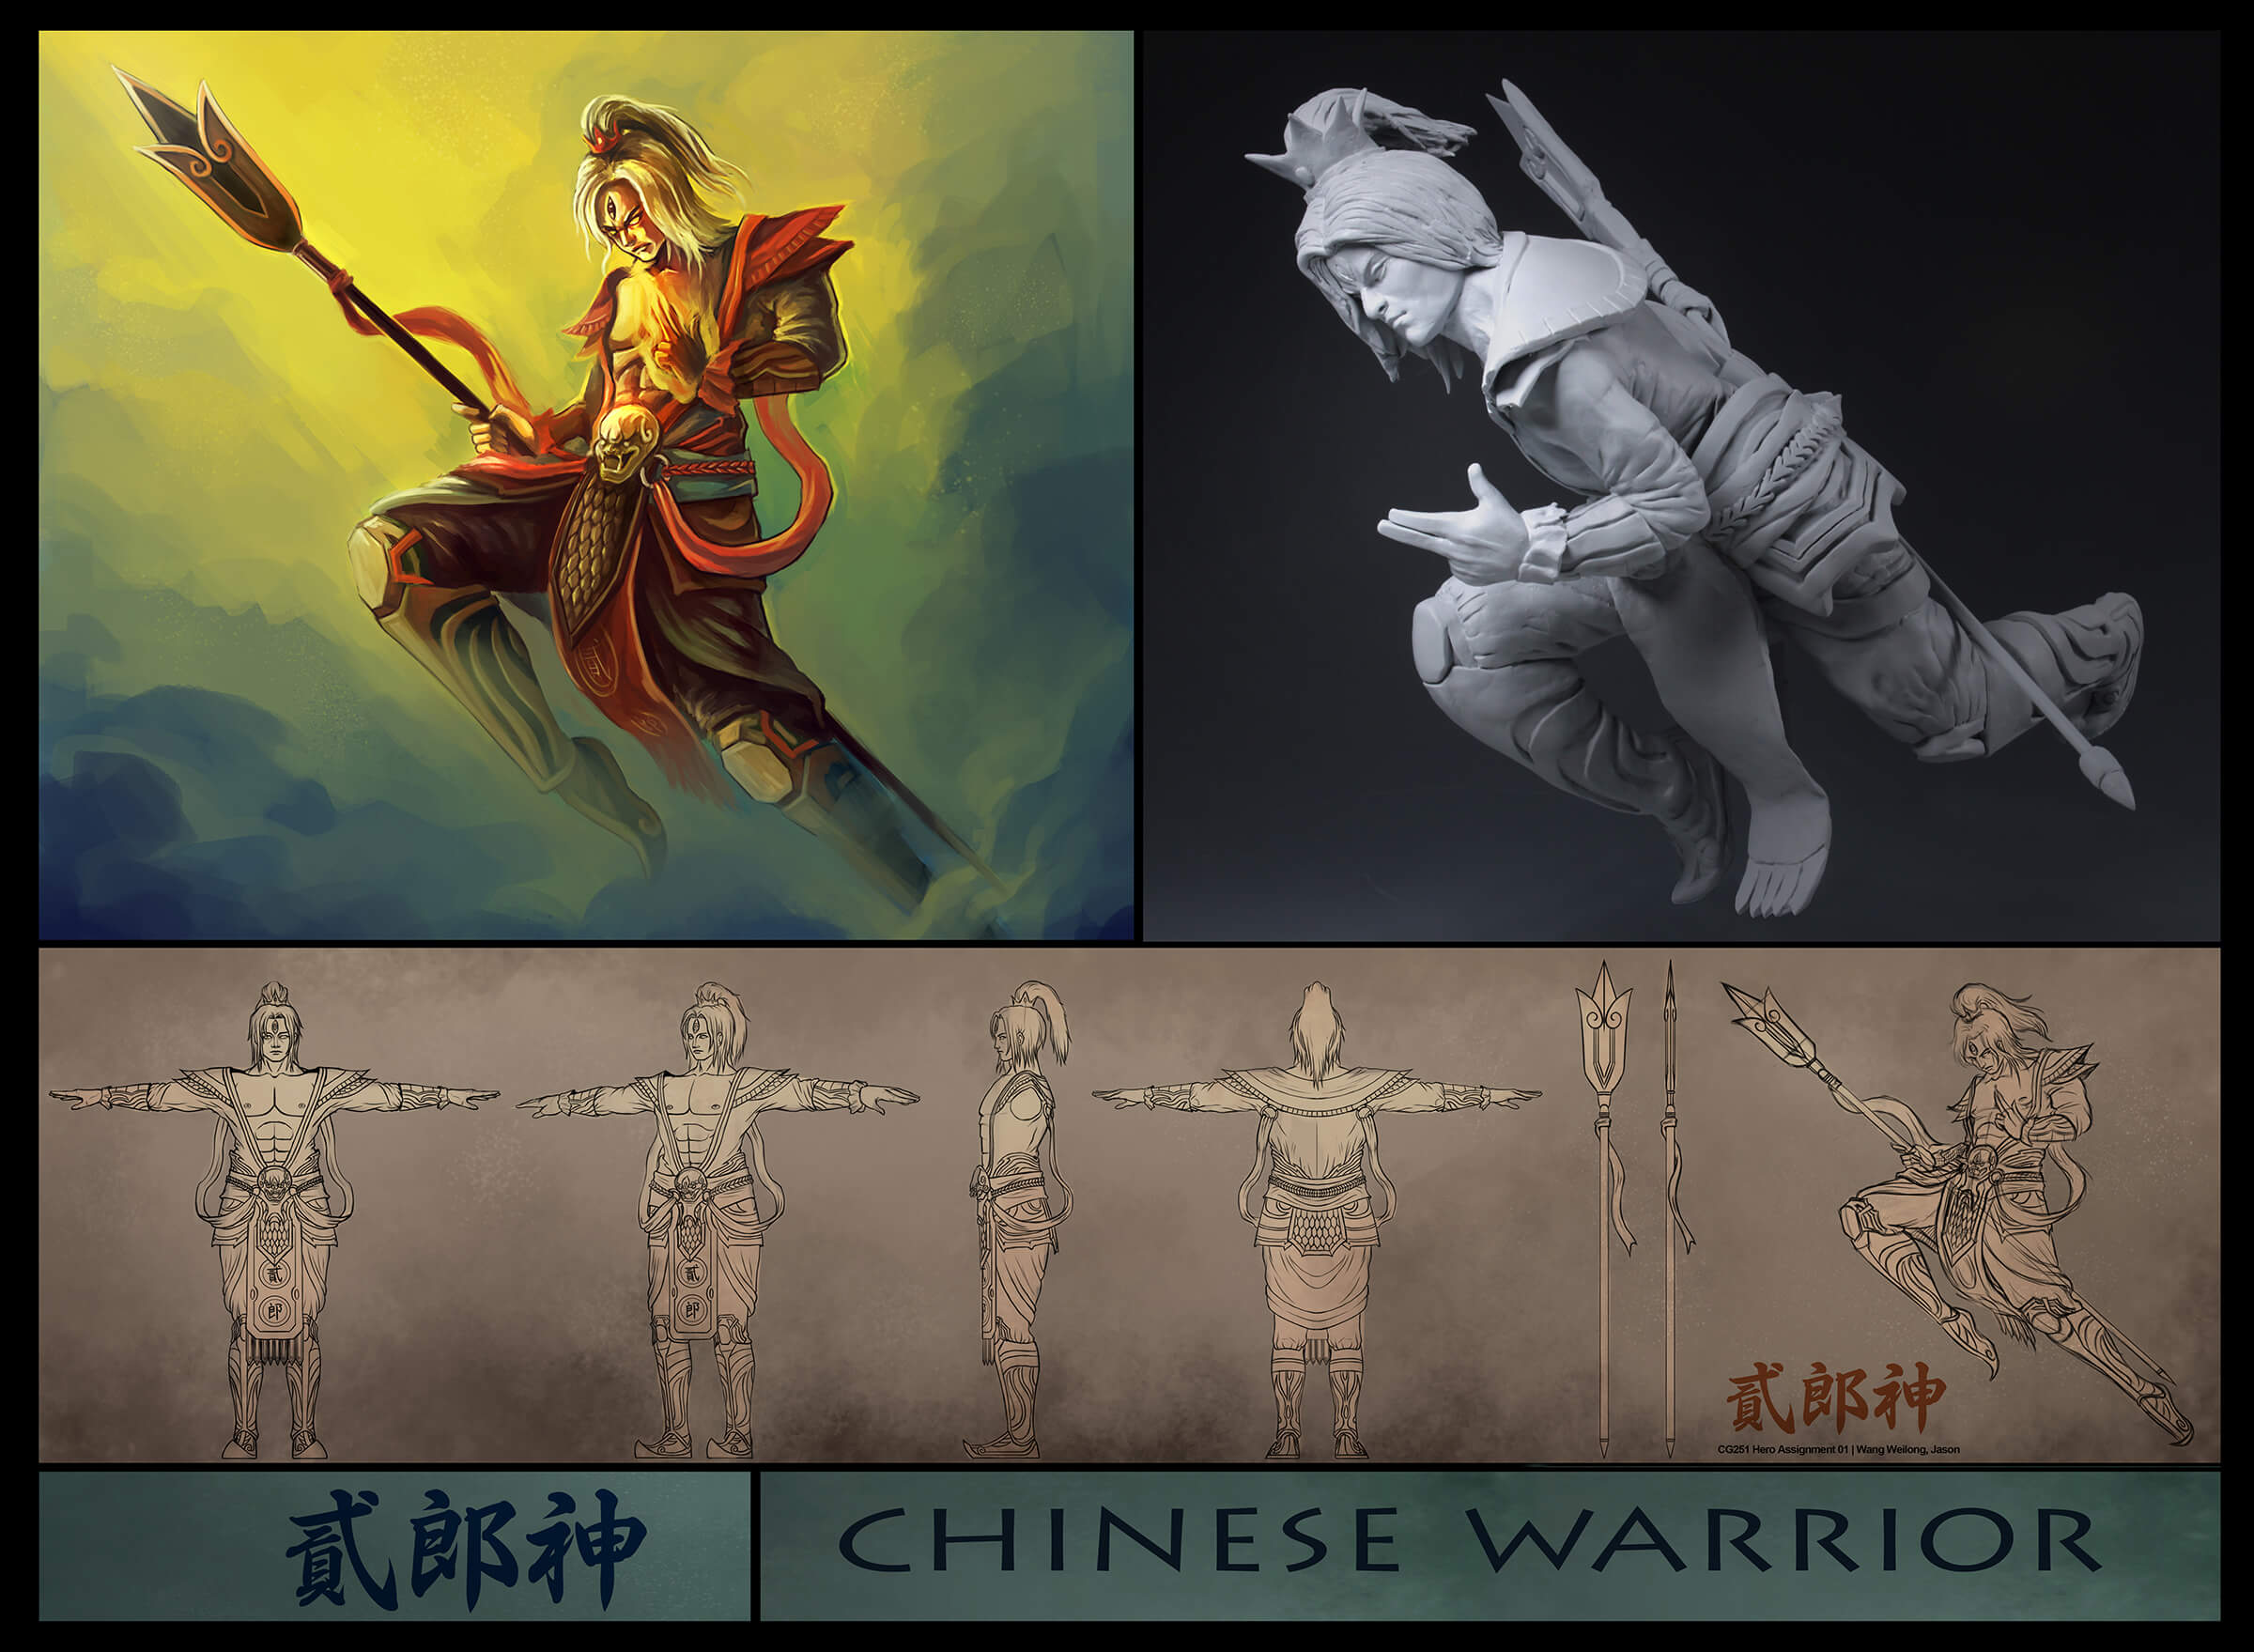 Turnaround character sketches, and 3D- and 2D-model of an ancient Chinese warrior holding an elaborate spear.